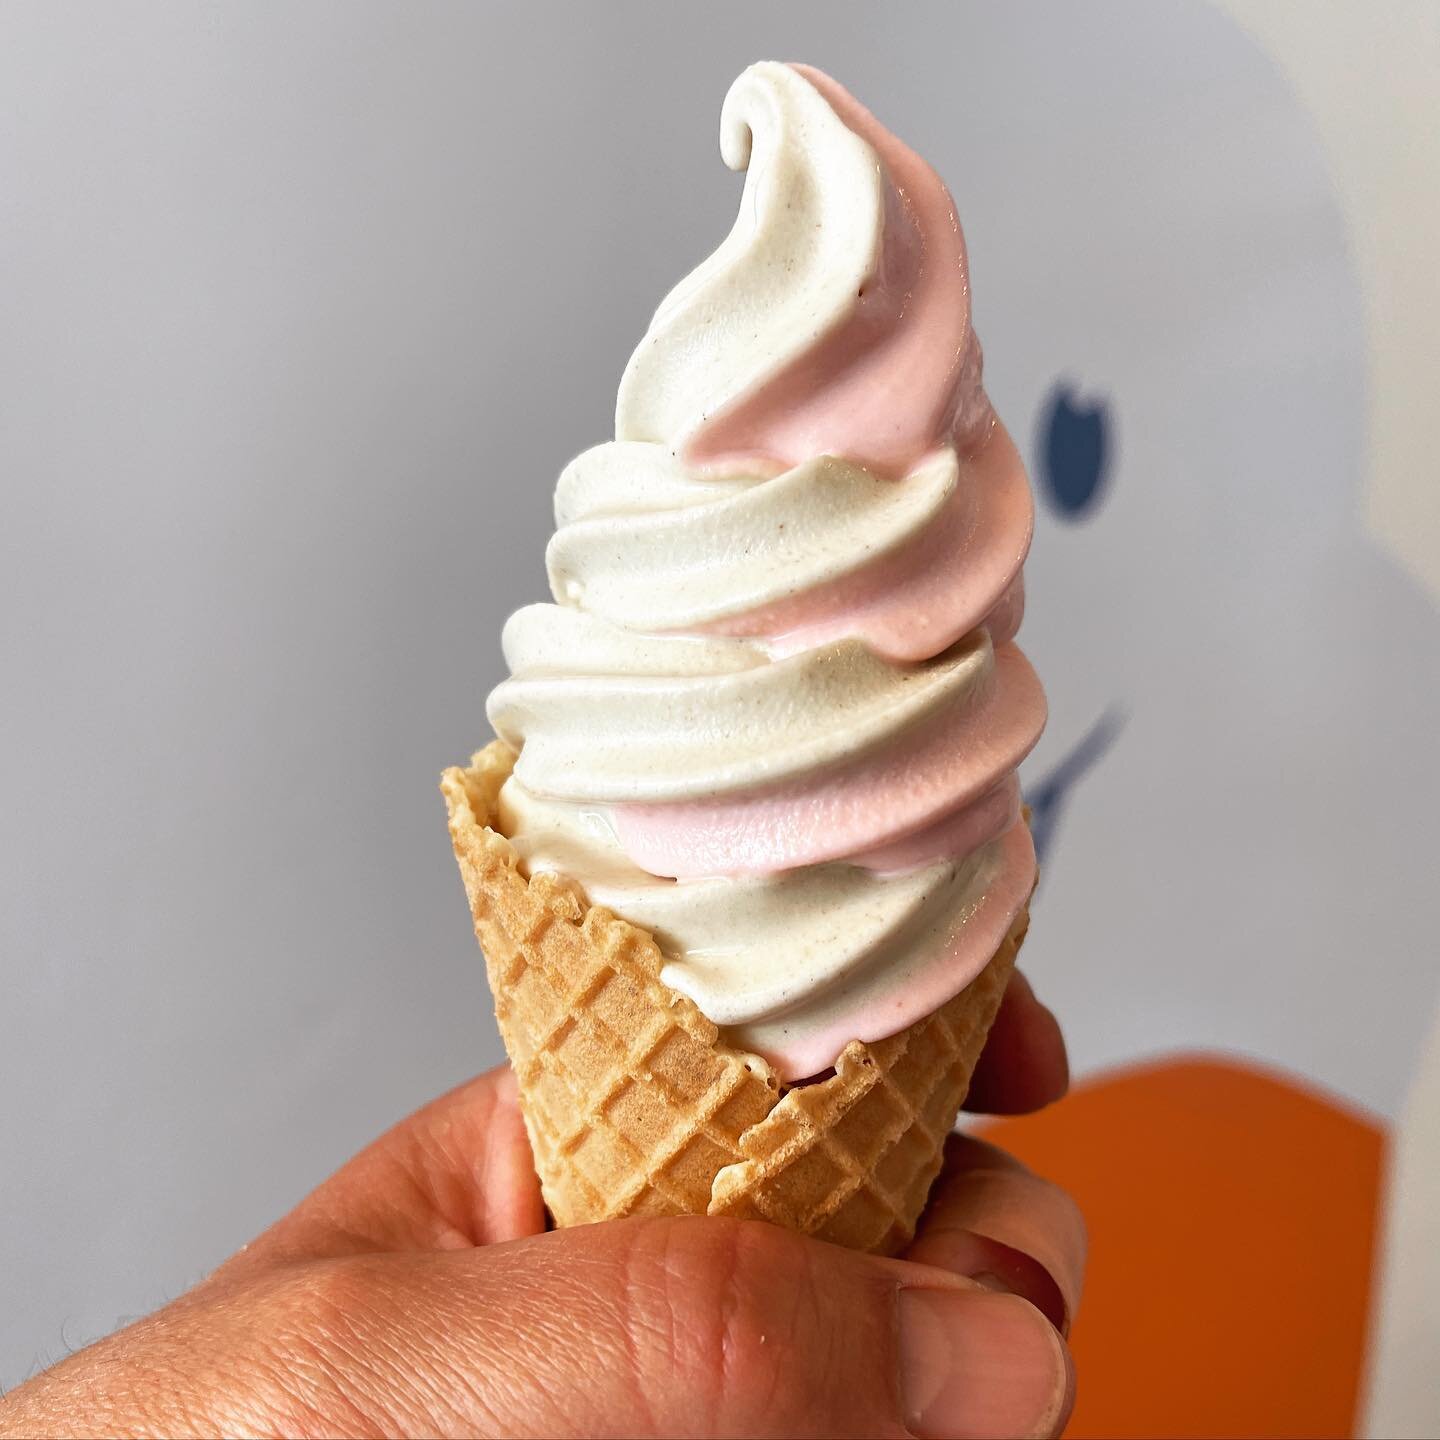 🔥Game Changer🔥 Introducing the homemade mini waffle cone. Shown here with our epic strawberry &amp; churro twist. When a full waffle cone is just too much, we&rsquo;ve got you. Half the size, twice the fun 🧇🍦😋

#icecream #dessert #sdfoodie #sdea